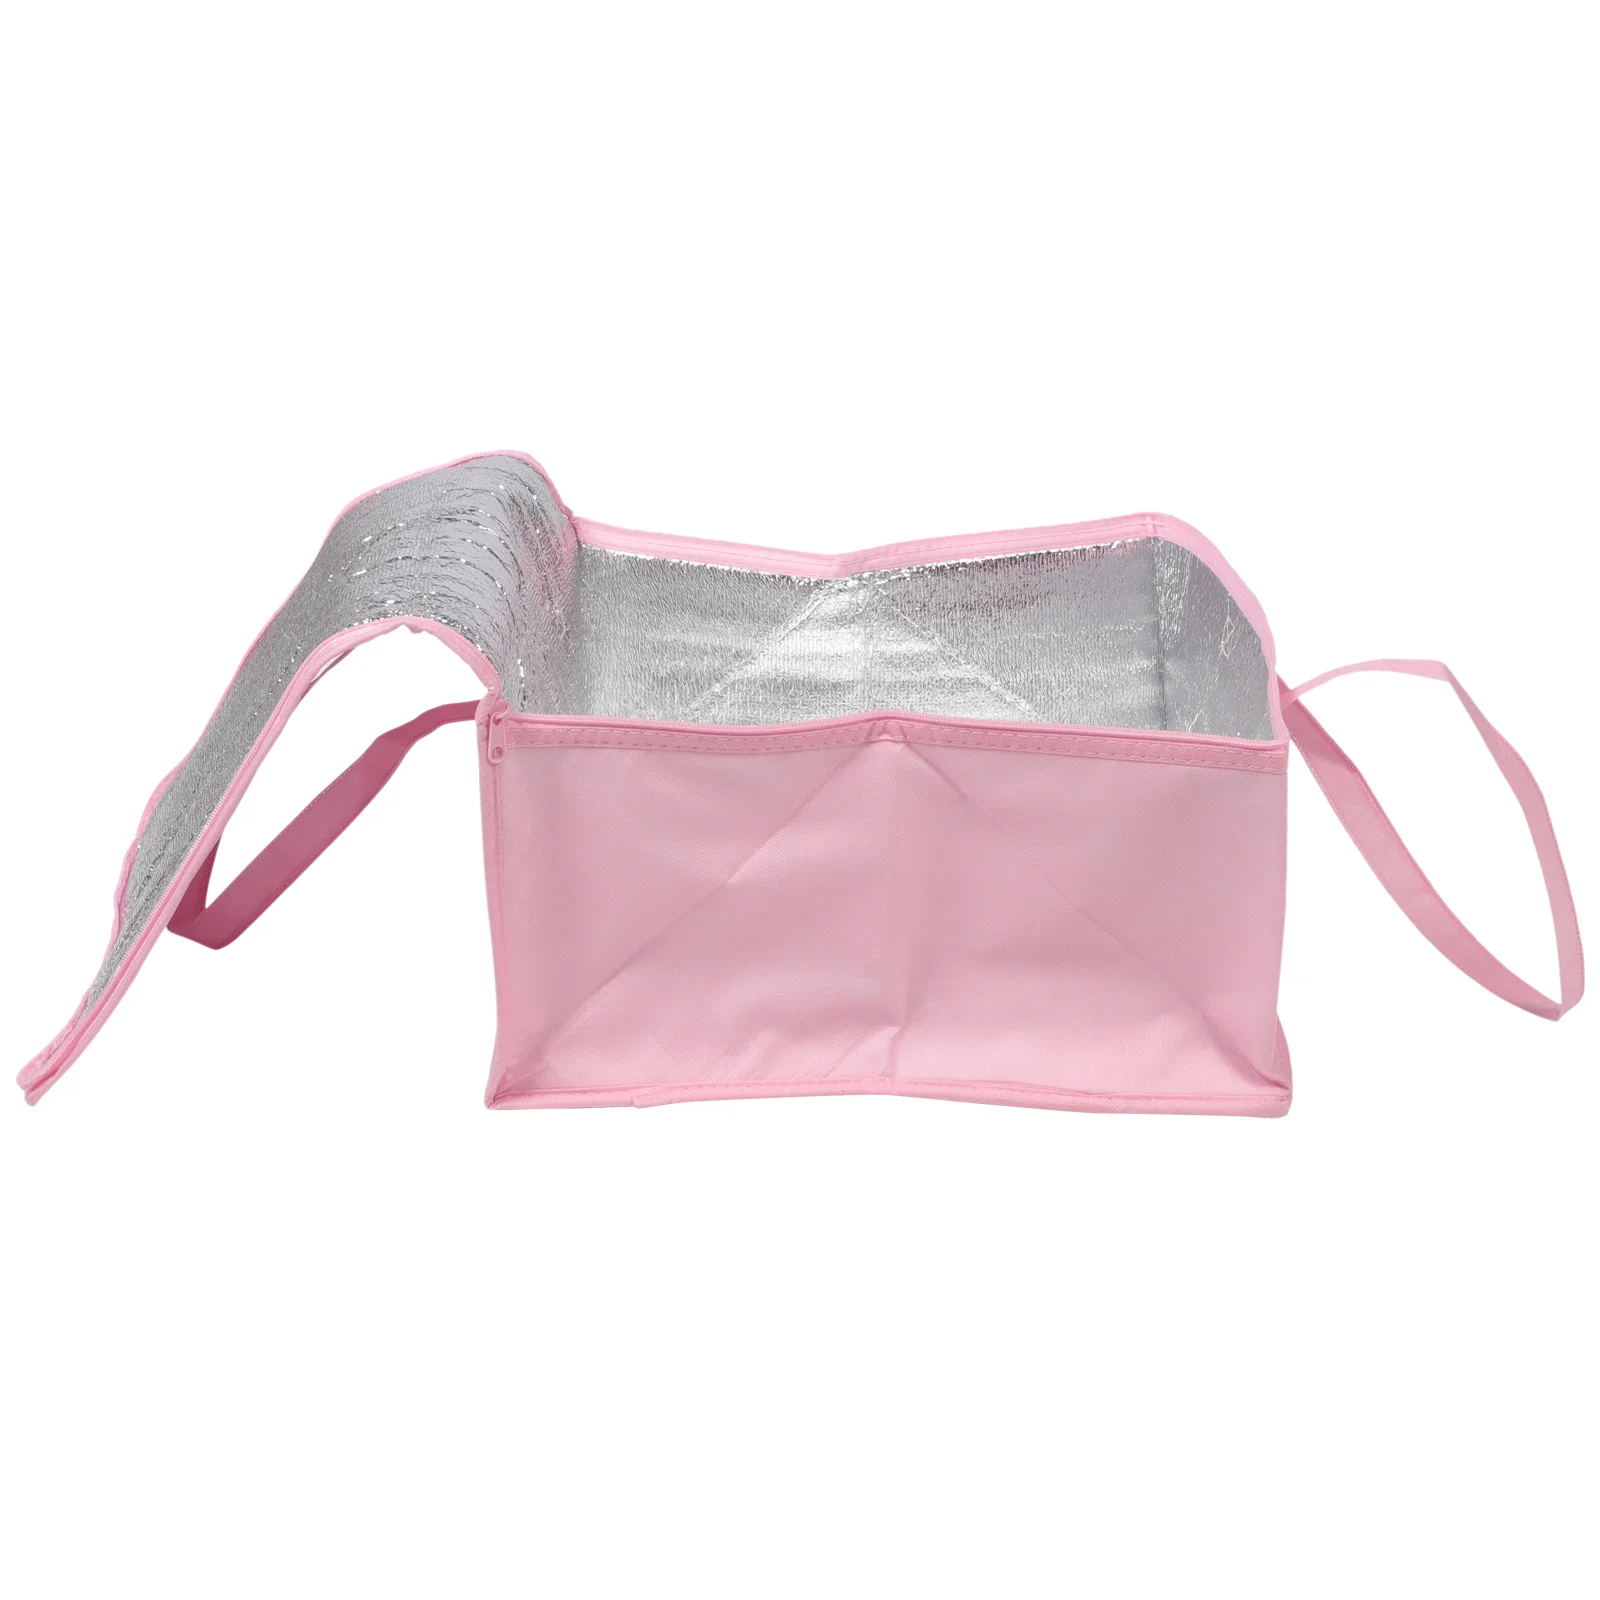 

Cake Insulation Bag Insulated Packing Portable Handle Food Milk Tea Non-woven Bags Takeout